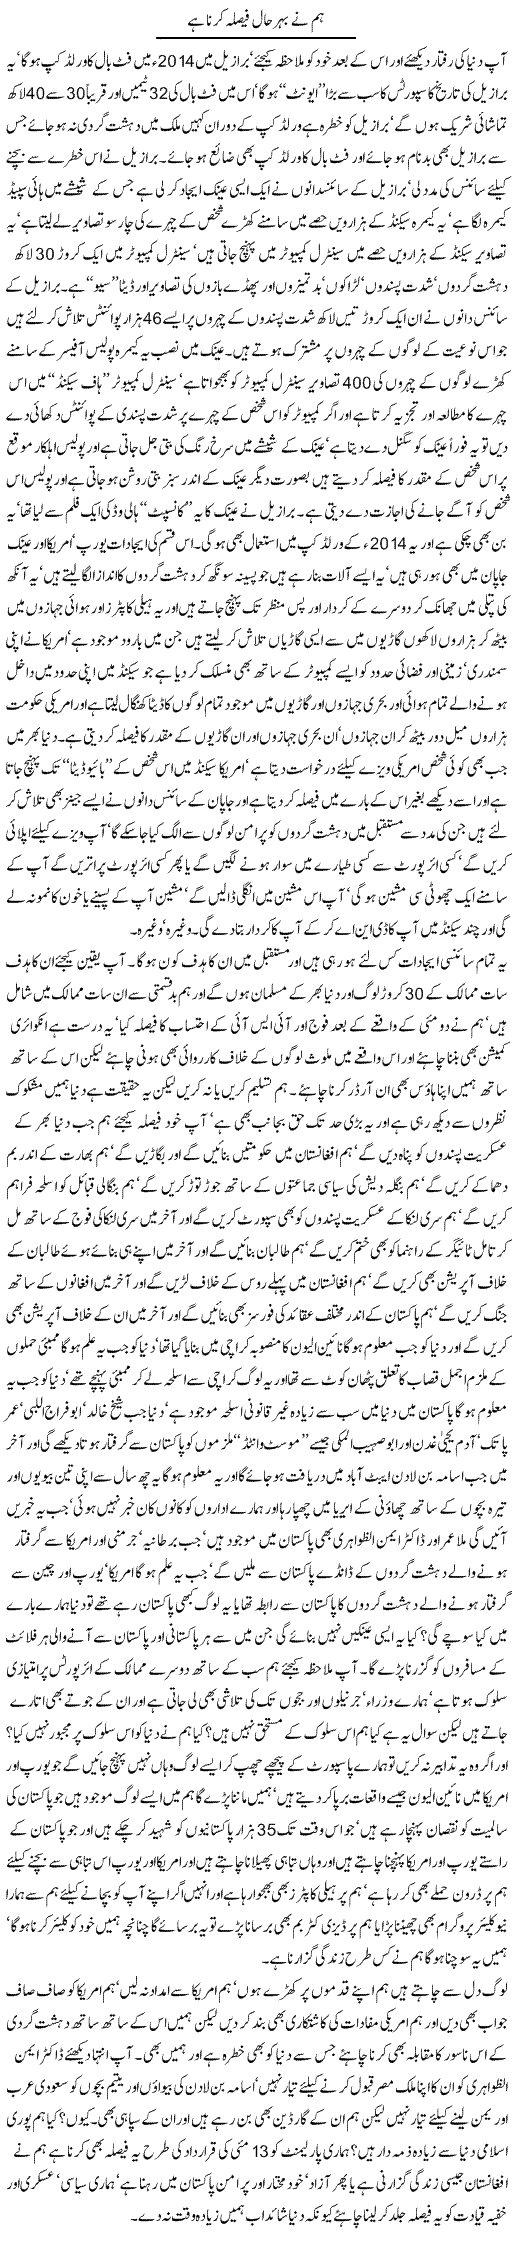 Science and Terrorism Express Column Javed Chaudhry 19 May 2011